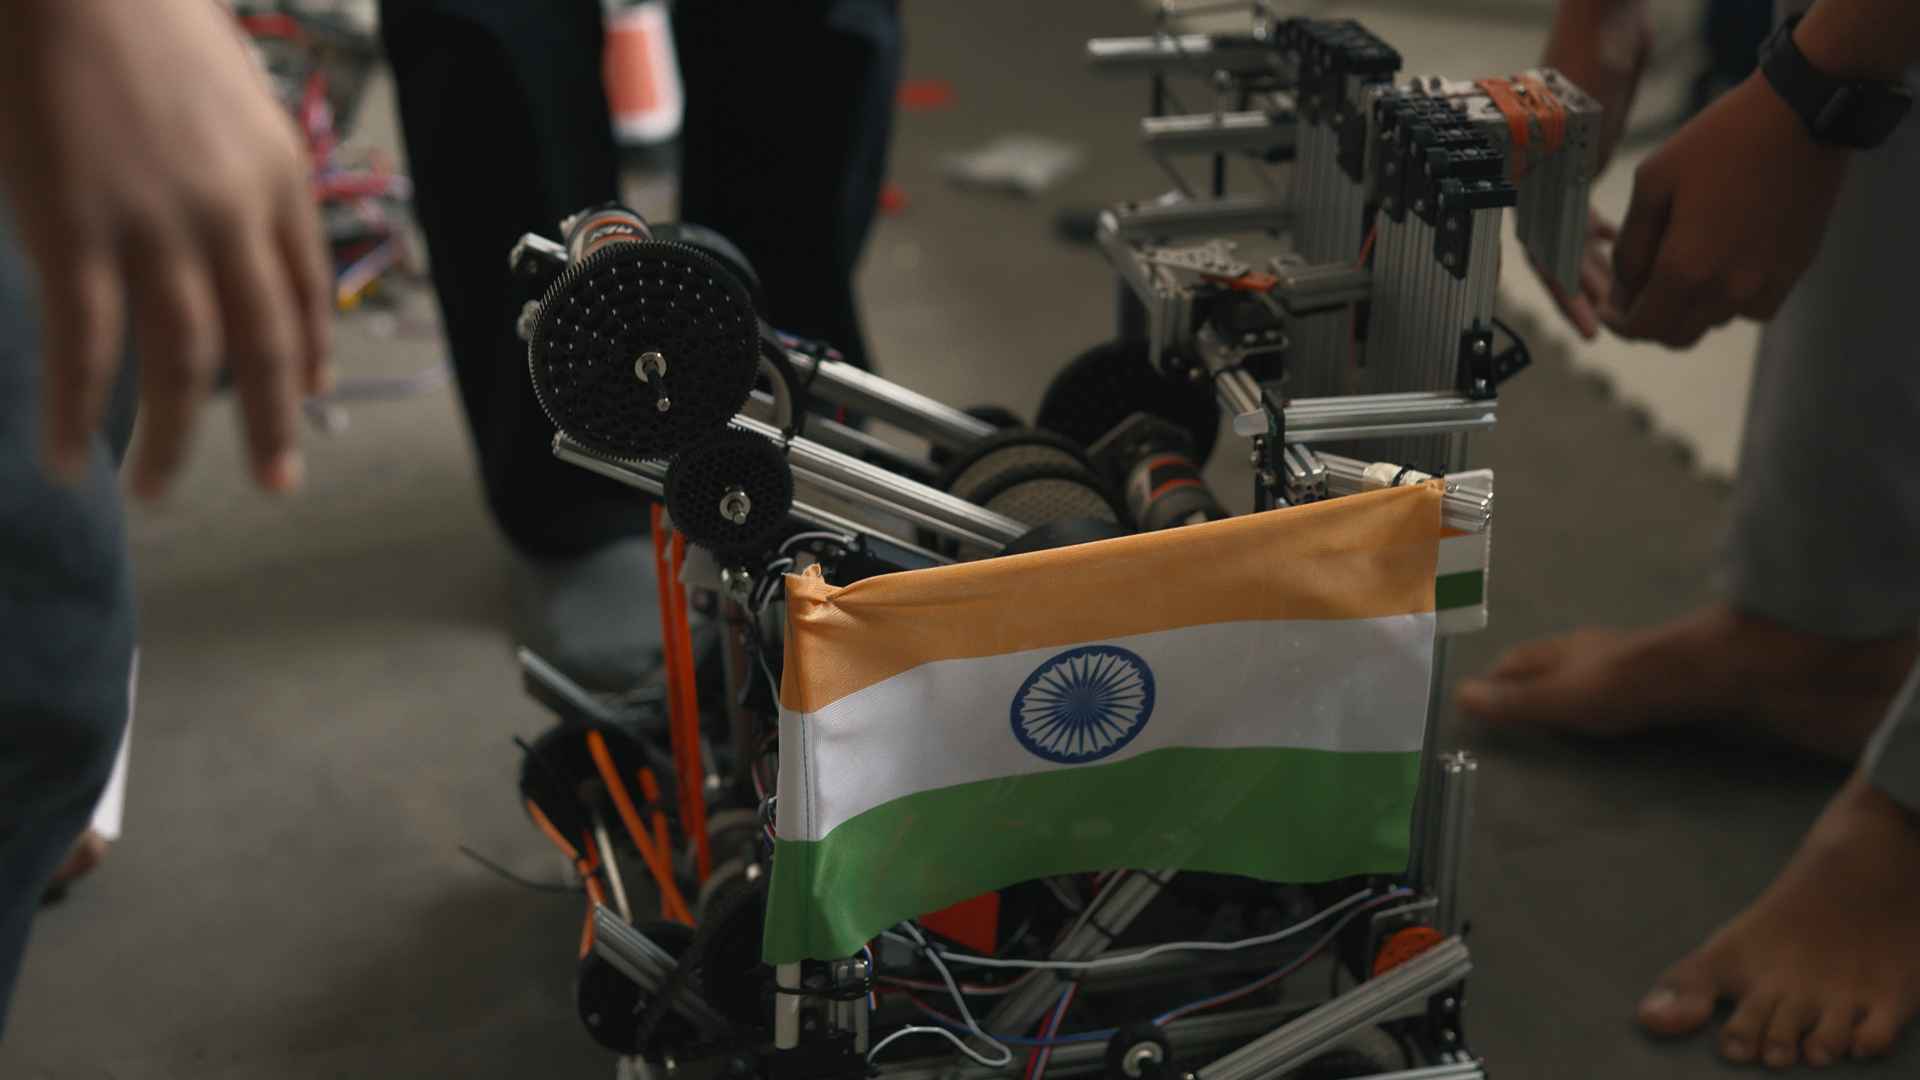 The robot was conceptualised, built and designed by the children and was later presented at Geneva in Switzerland